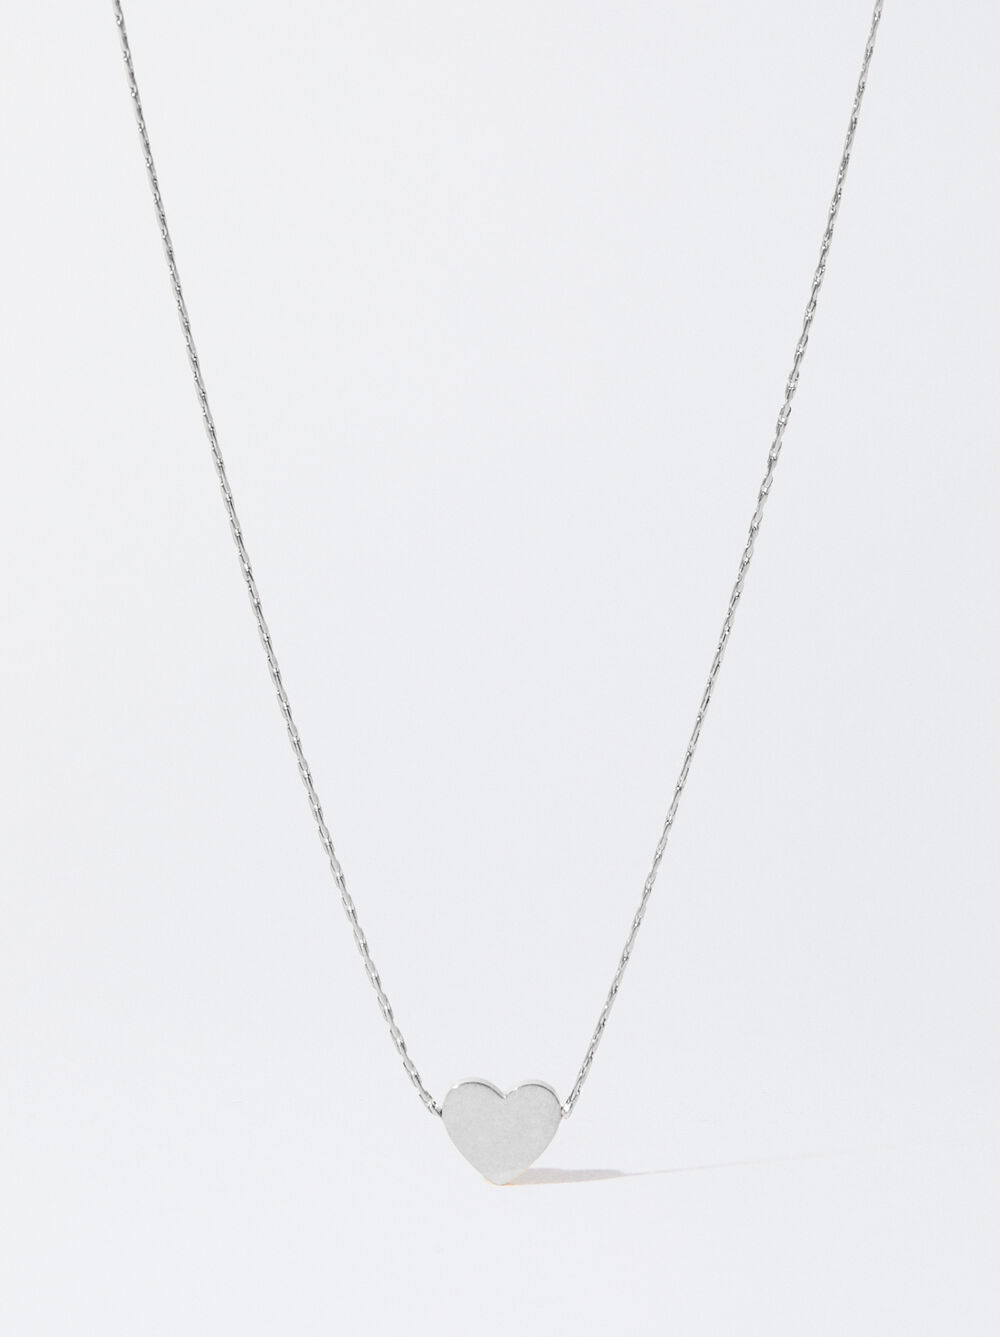 Stainless Steel Necklace With Heart